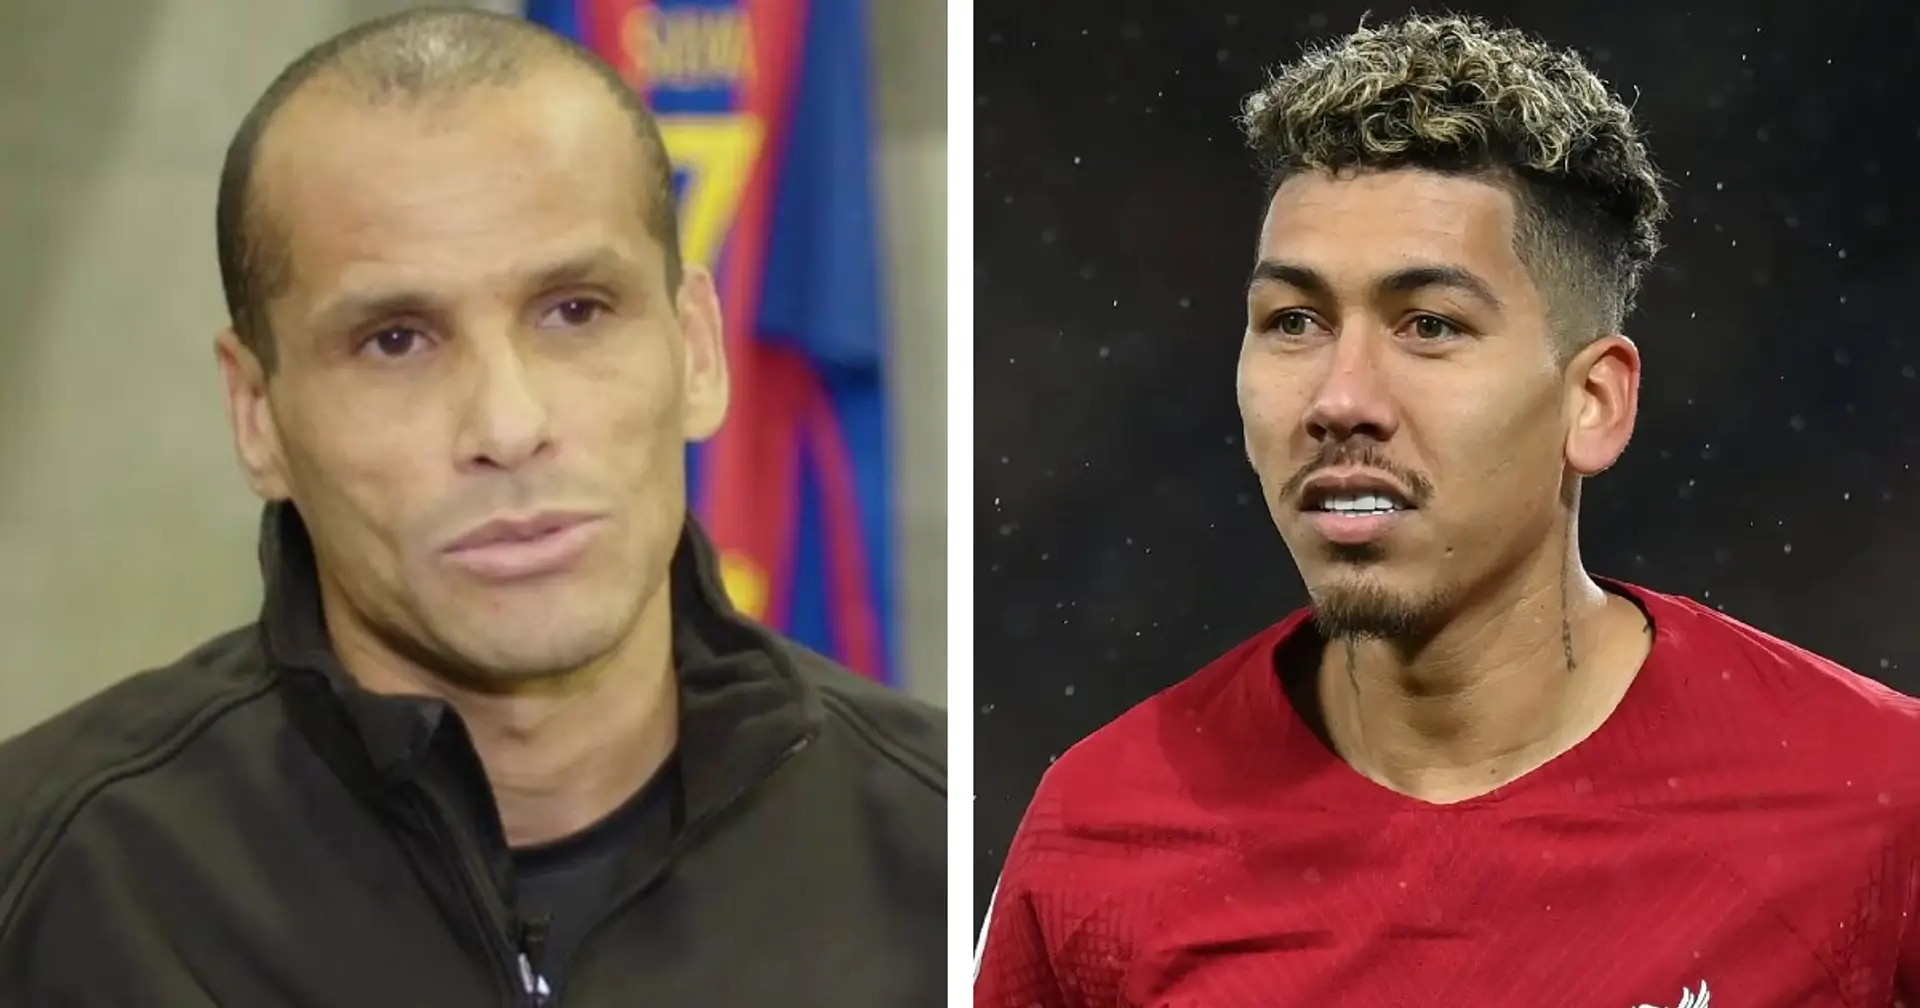 'He should find out what his role would be': Barca legend Rivaldo explains why Firmino should join them